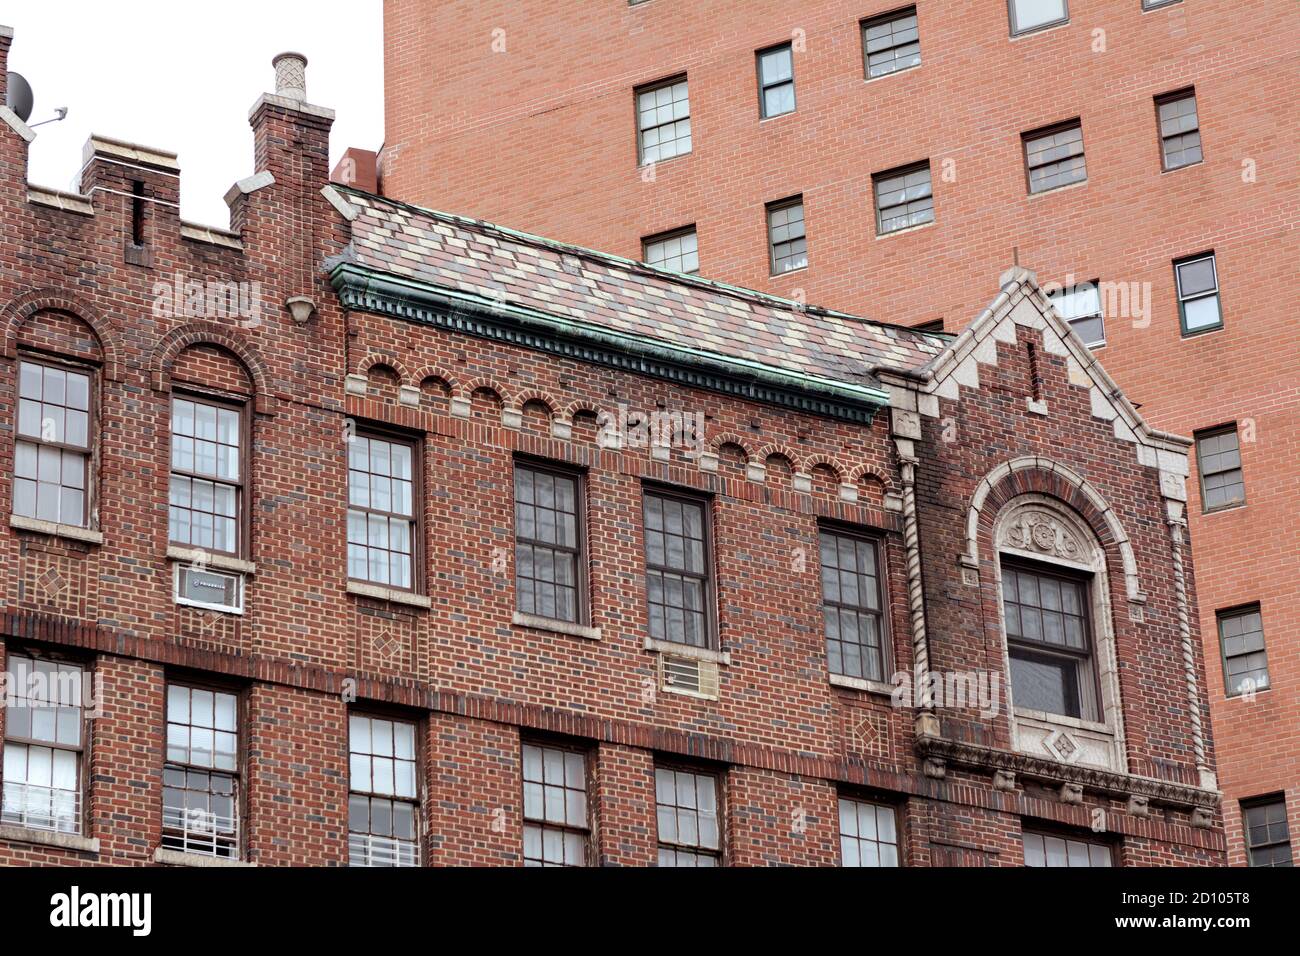 NEW YORK, USA - MAY 10, 2019: Brick apartment building with ornate exterior between Greenwich Avenue & 7th Avenue South, New York City on May 10, 2019 Stock Photo